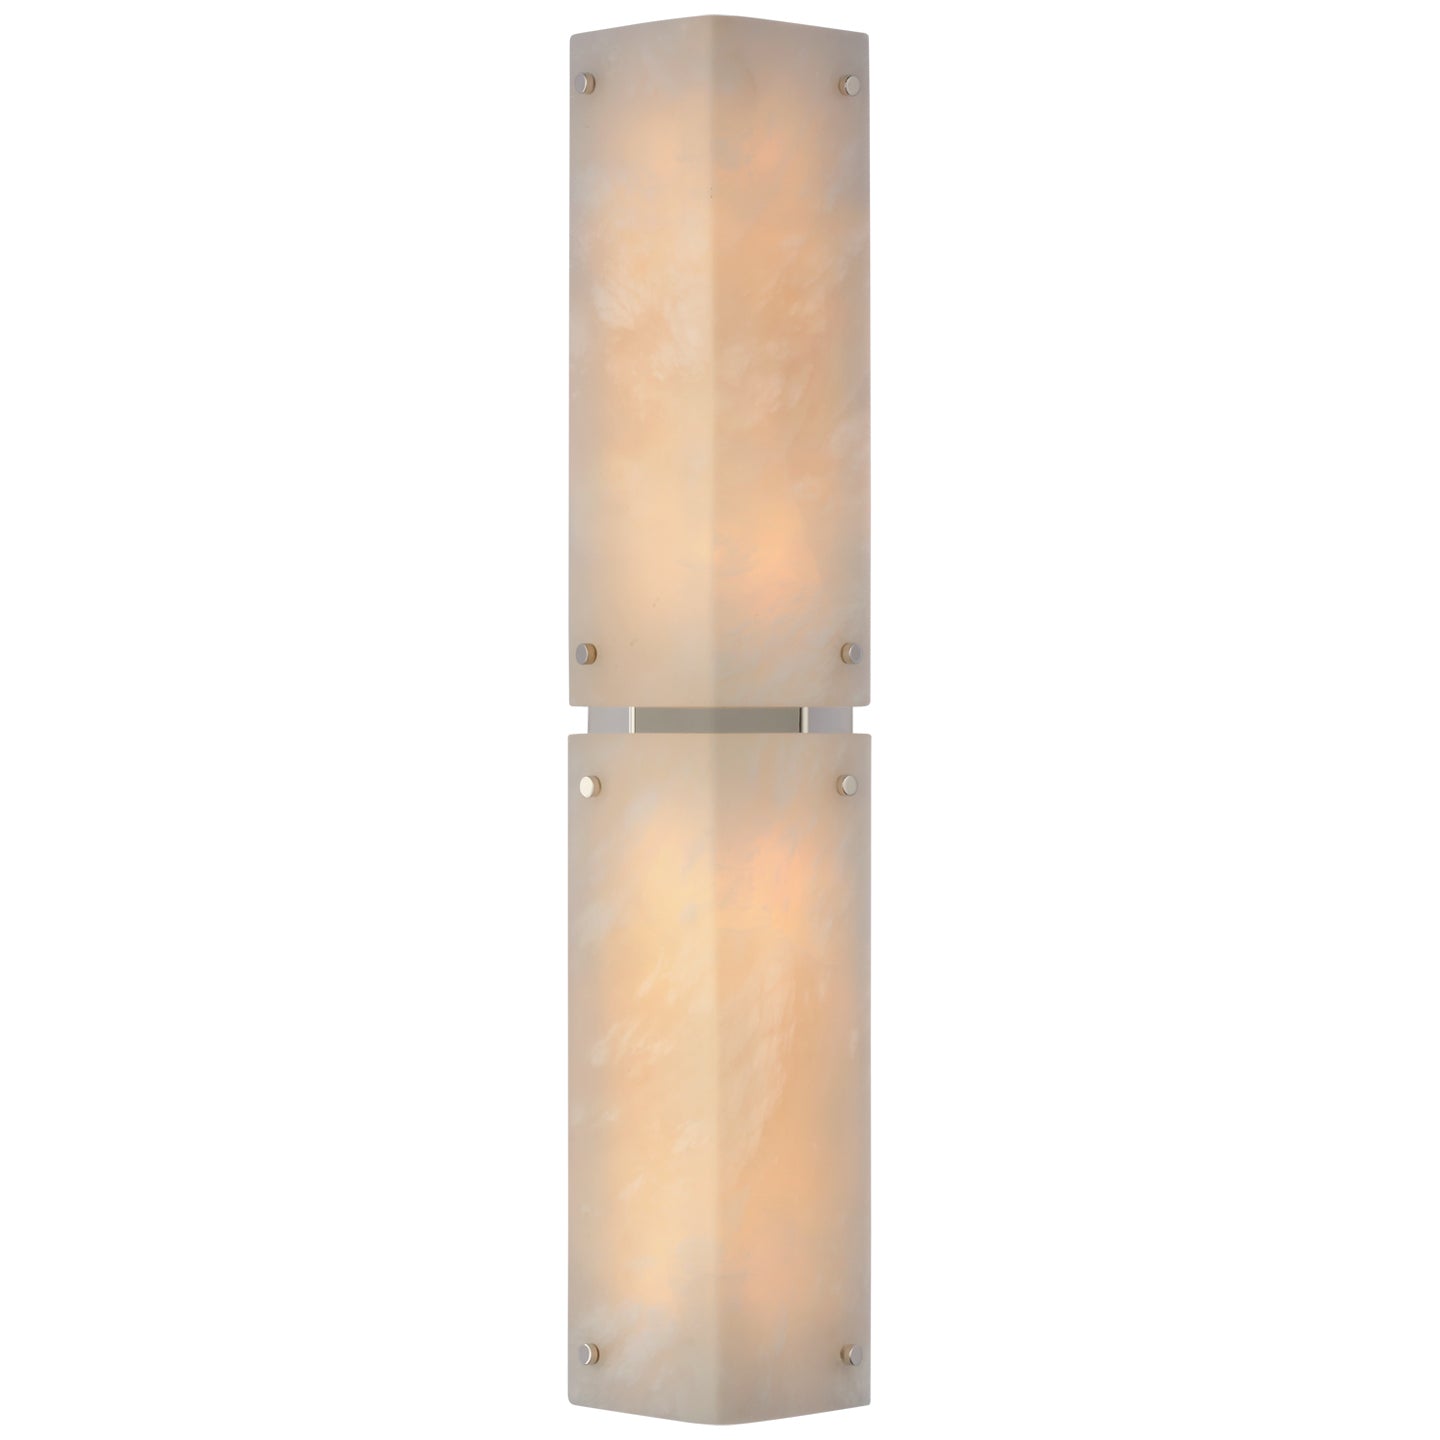 Visual Comfort Signature - ARN 2044ALB/PN - LED Wall Sconce - Clayton - Alabaster and Polished Nickel